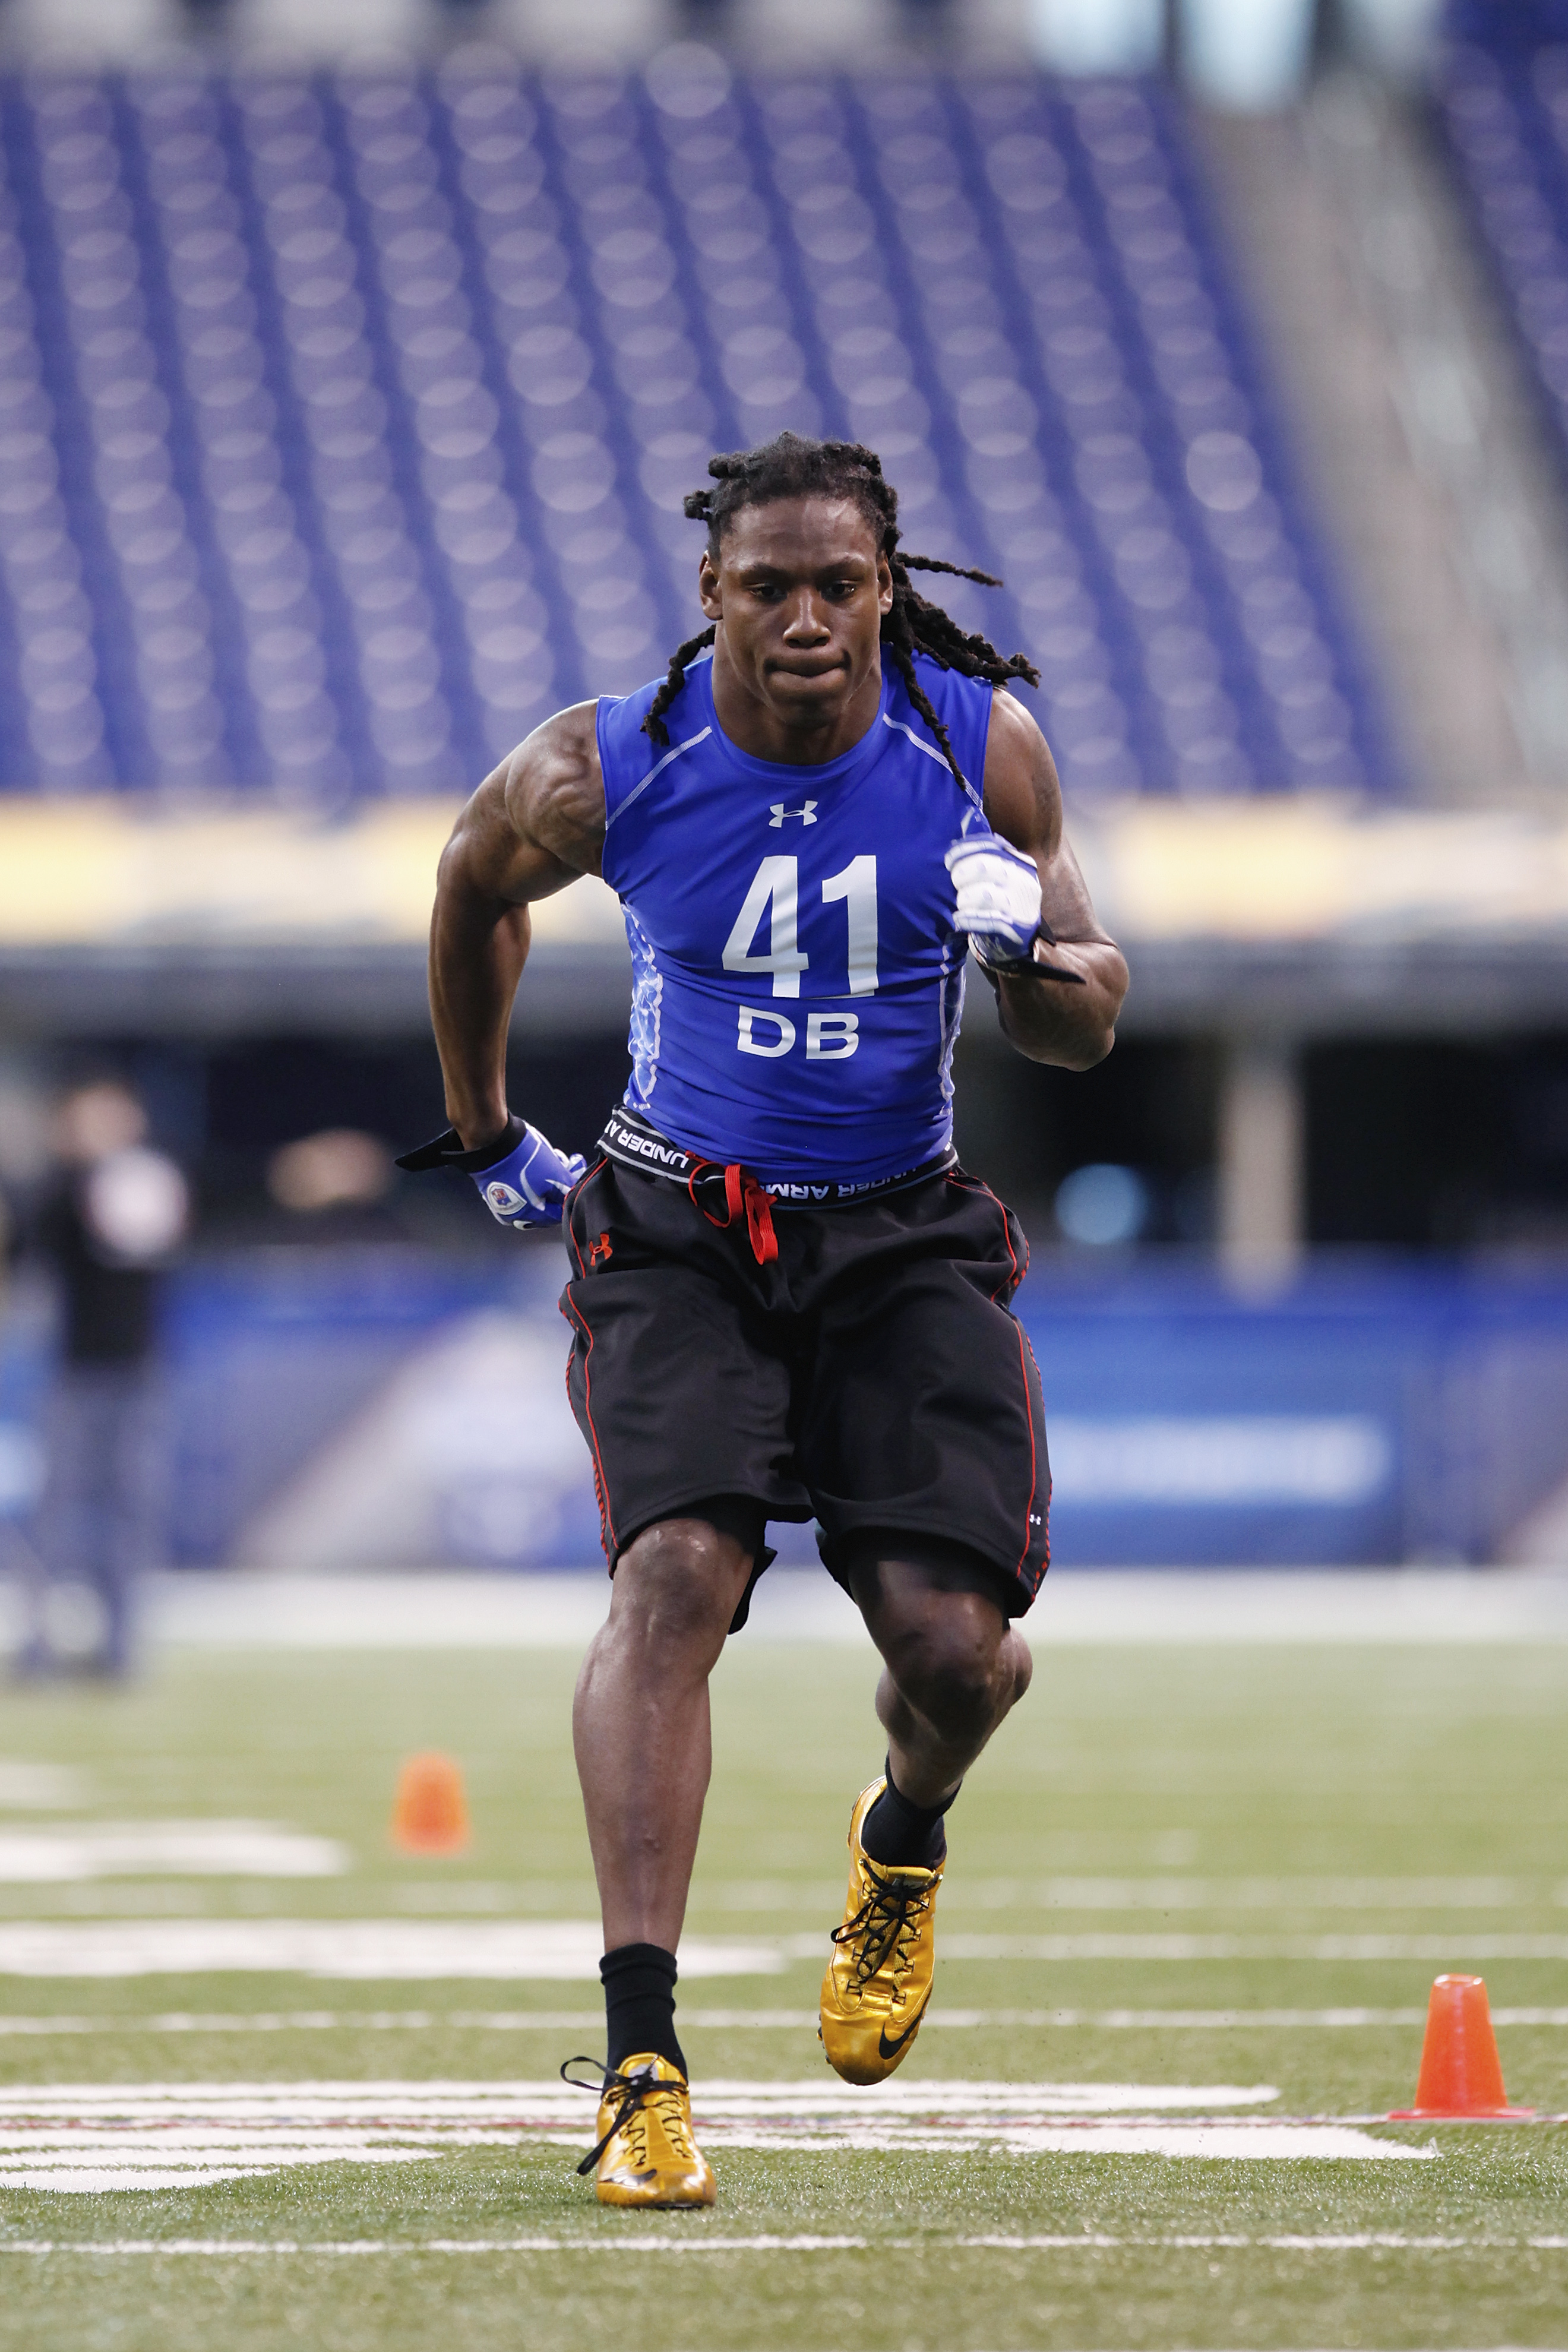 INDIANAPOLIS, IN - MARCH 1: Defensive back Robert Sands #41 of West Virginia works out during the 2011 NFL Scouting Combine at Lucas Oil Stadium on February 28, 2011 in Indianapolis, Indiana. (Photo by Joe Robbins/Getty Images)